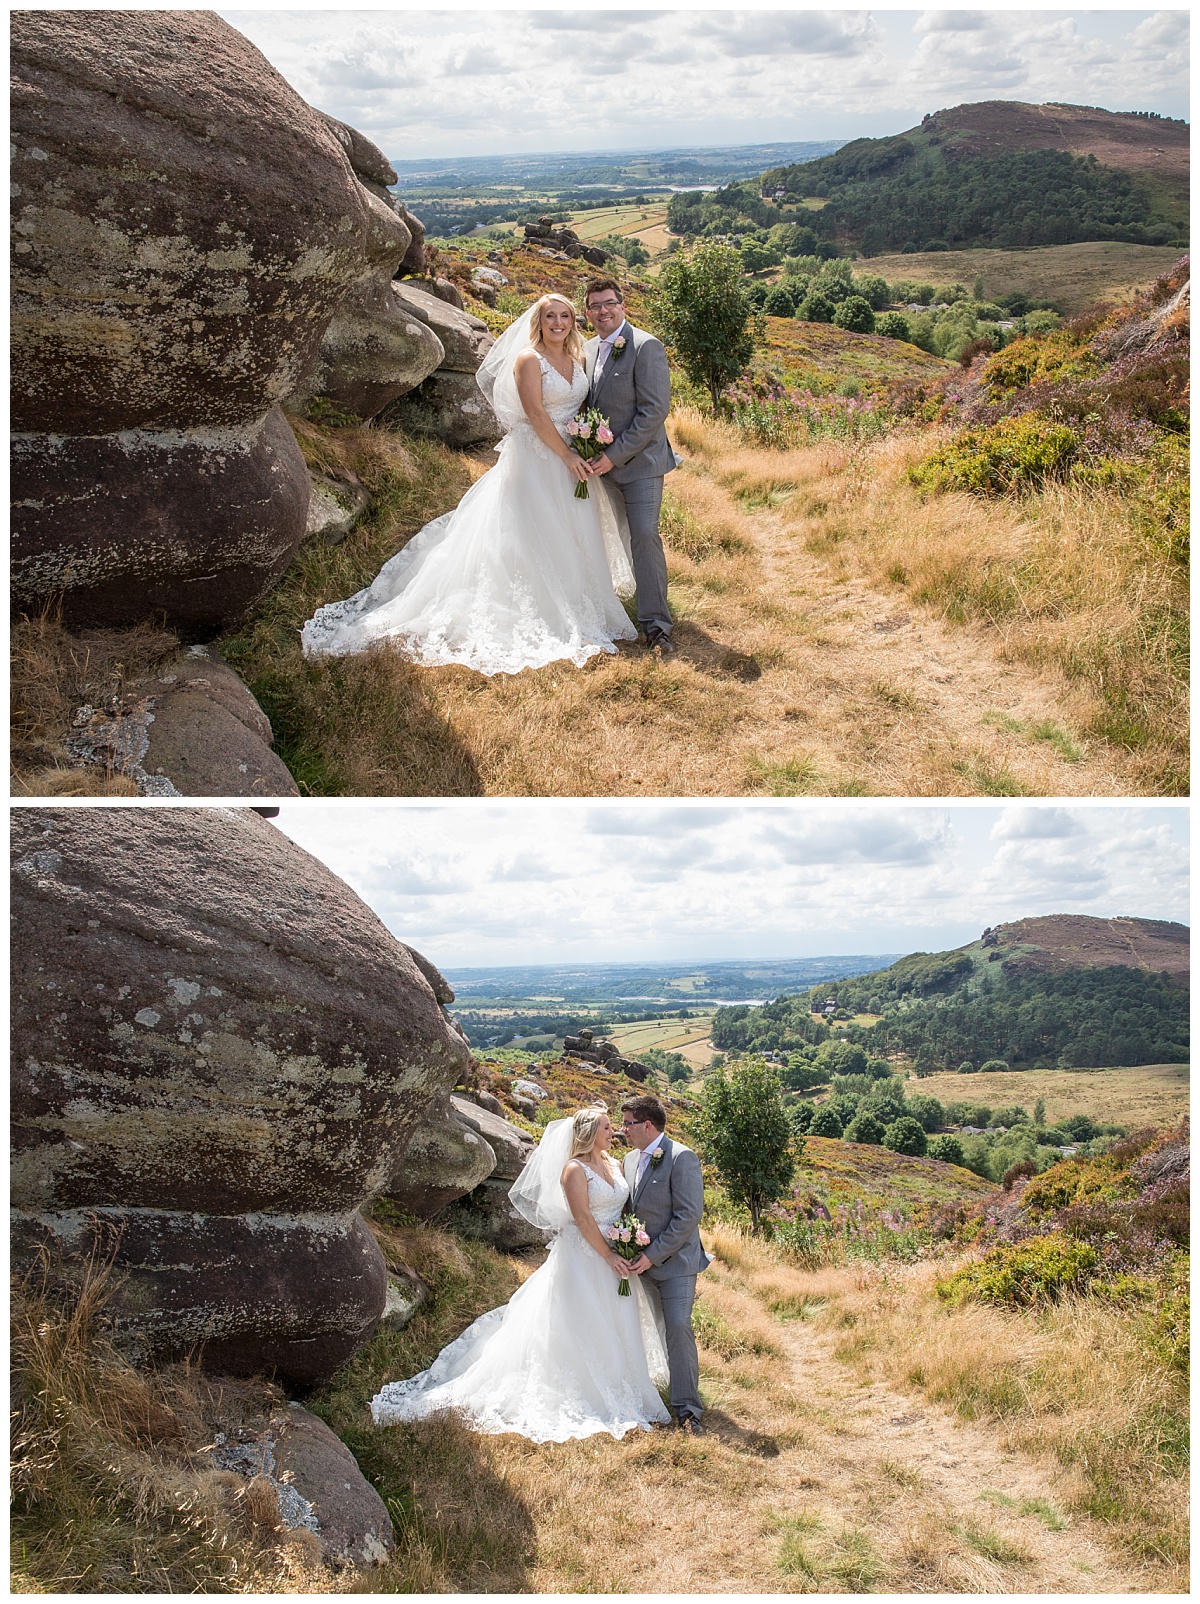 Wedding Photography Manchester - Lisa and James's The Three Horseshoes Country Inn wedding 1